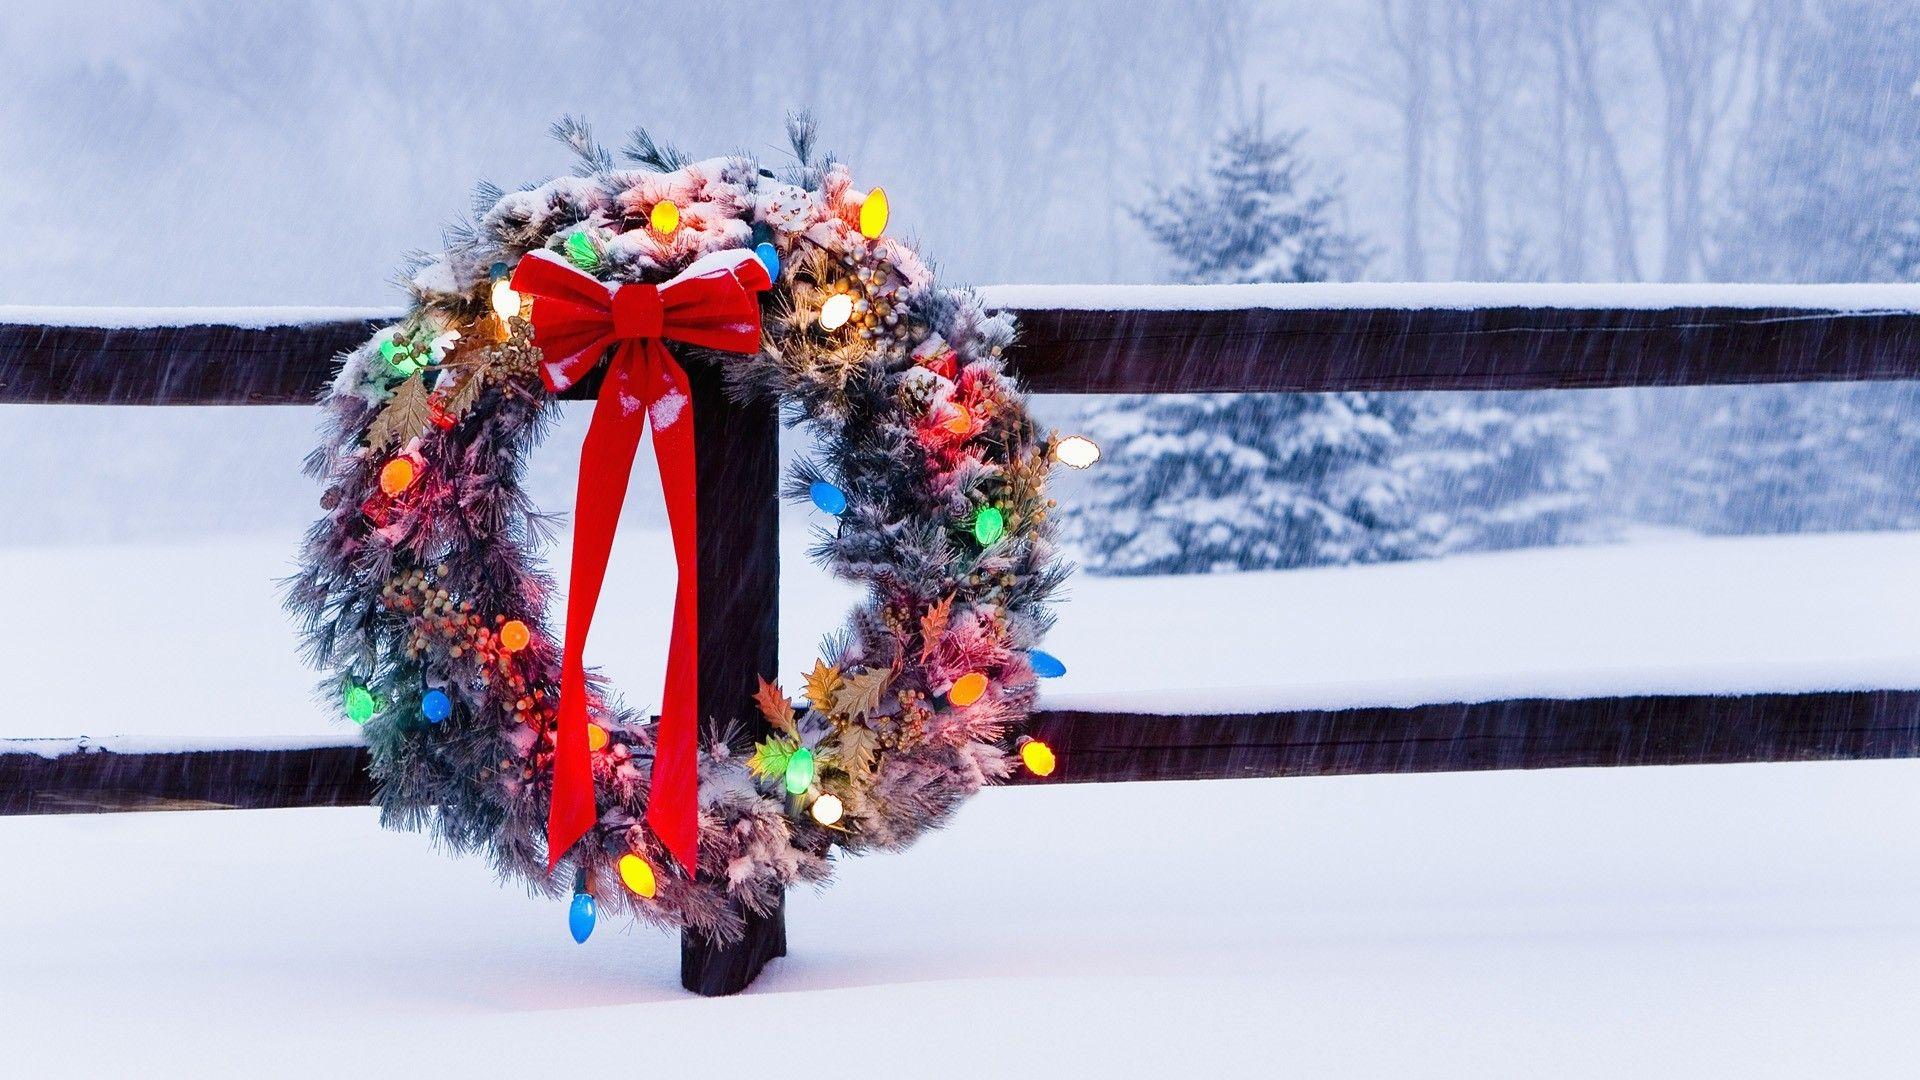 Download Wallpaper 1920x1080 Wreath, New year, Spruce, Snow